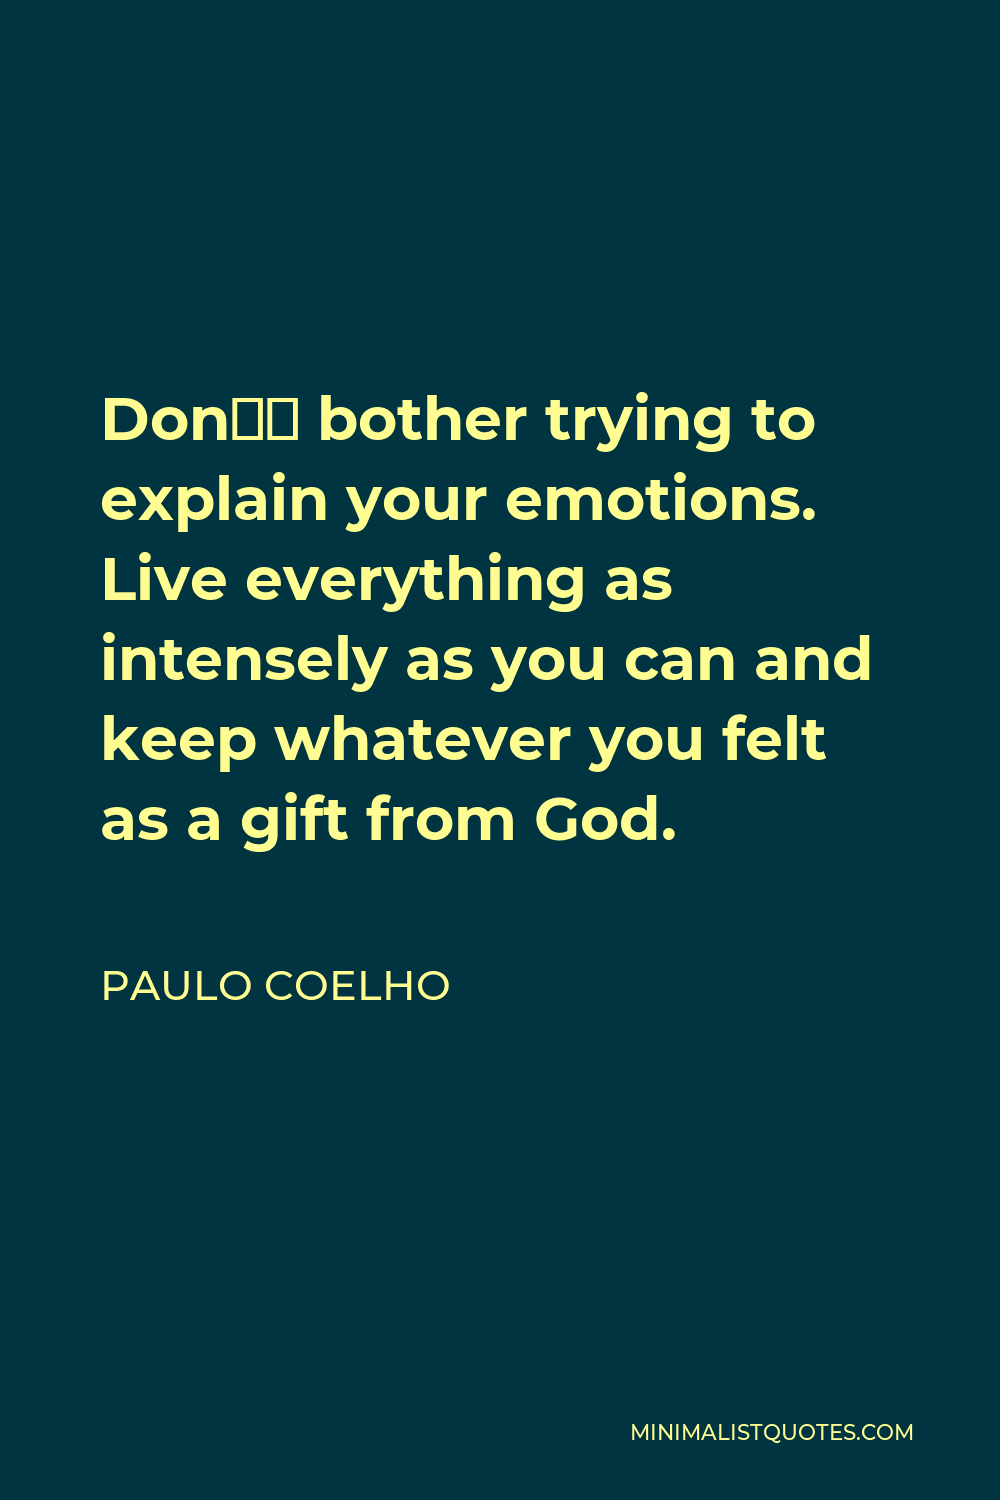 Paulo Coelho Quote - Don’t bother trying to explain your emotions. Live everything as intensely as you can and keep whatever you felt as a gift from God.